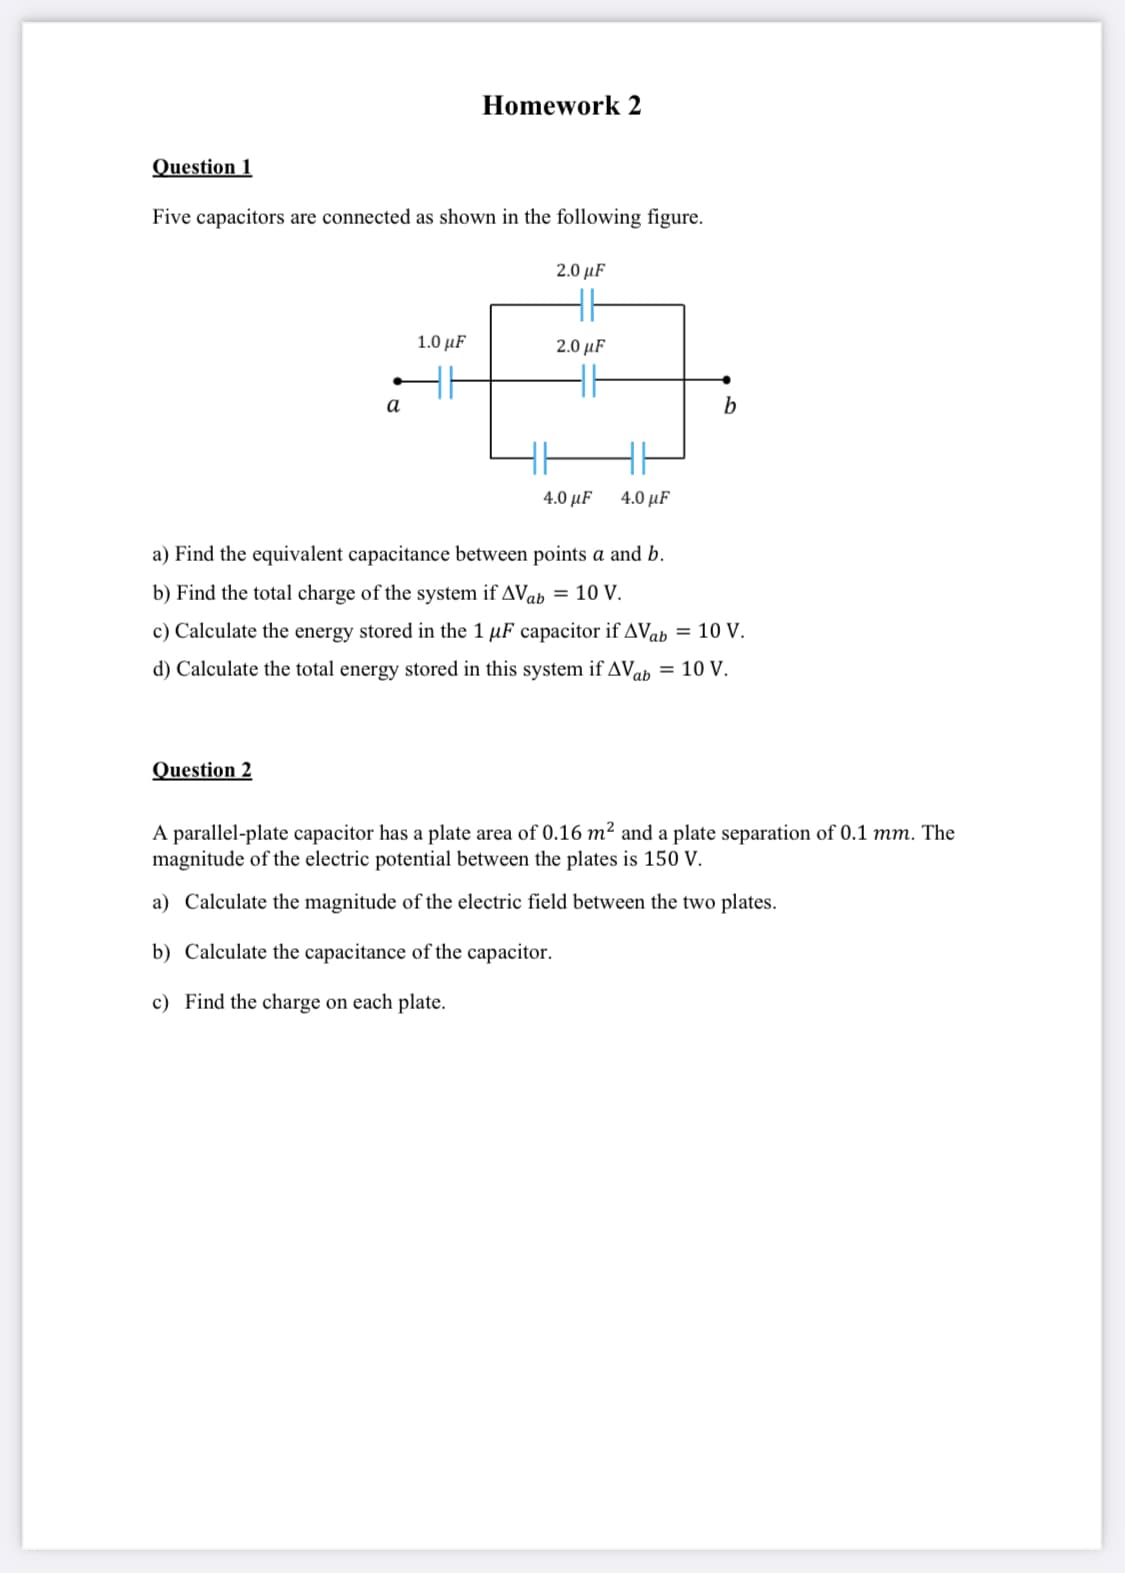 Homework 2
Question 1
Five capacitors are connected as shown in the following figure.
2.0 µF
1.0 µF
2.0 µF
a
b
4.0 μF
4.0 μF
a) Find the equivalent capacitance between points a and b.
b) Find the total charge of the system if AVab = 10 V.
c) Calculate the energy stored in the 1 µF capacitor if AVab = 10 V.
d) Calculate the total energy stored in this system if AVoh = 10 V.
Question 2
A parallel-plate capacitor has a plate area of 0.16 m² and a plate separation of 0.1 mm. The
magnitude of the electric potential between the plates is 150 V.
a) Calculate the magnitude of the electric field between the two plates.
b) Calculate the capacitance of the capacitor.
c) Find the charge on each plate.
